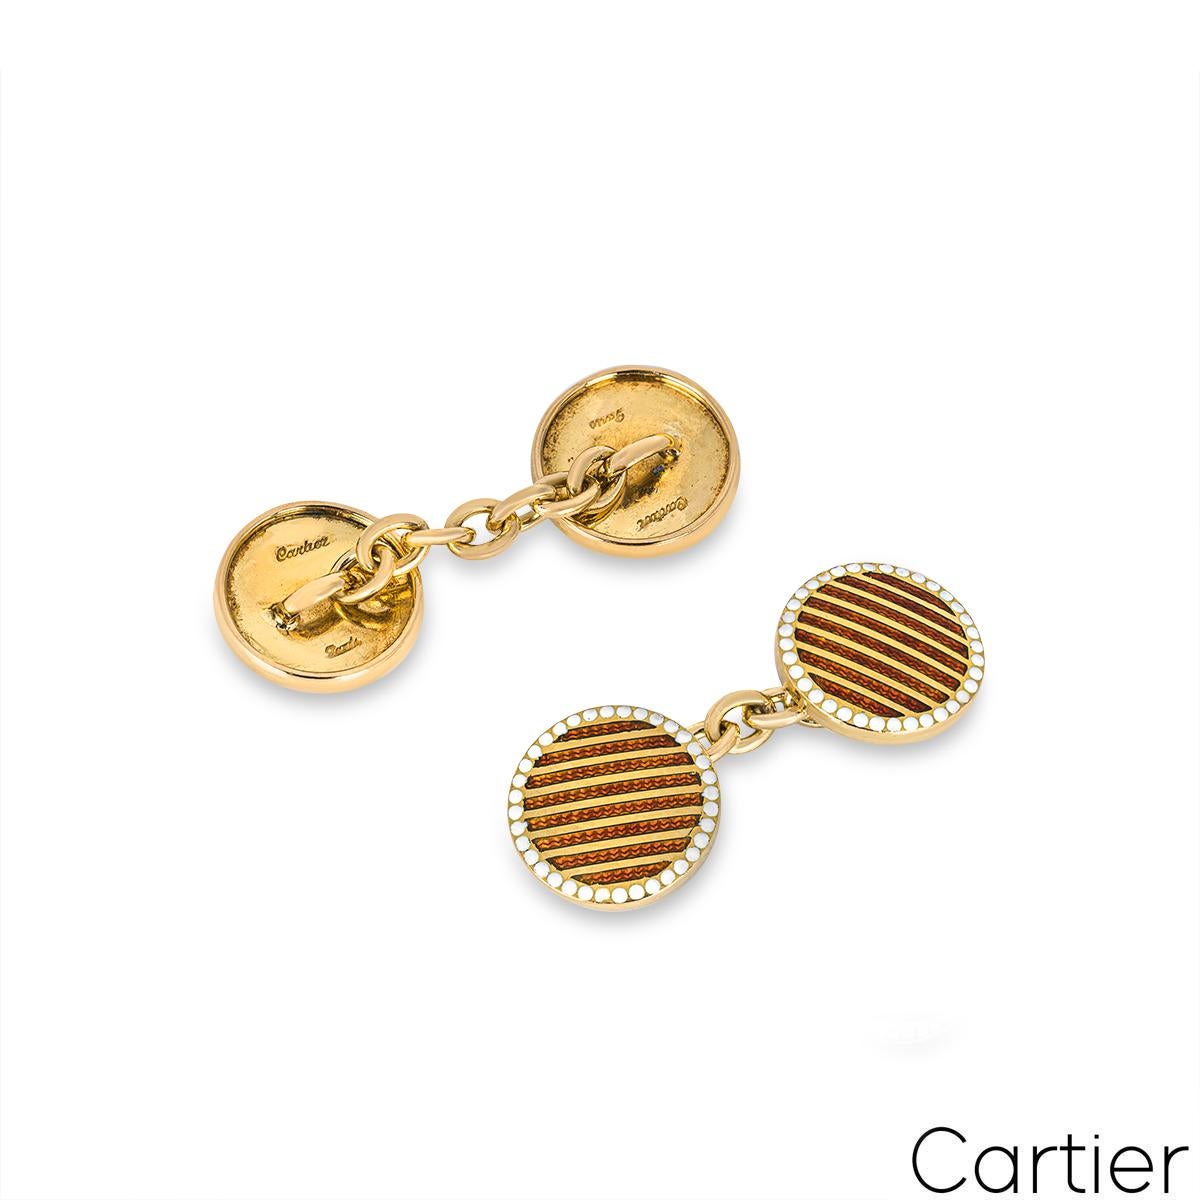 A rare yellow gold enamel dress set by Cartier. The set features a pair of cufflinks and 4 dress studs featuring a red enamel stripe pattern with a white enamel dot border. They measure 12mm in width and have a gross weight of 14.23 grams.

Comes